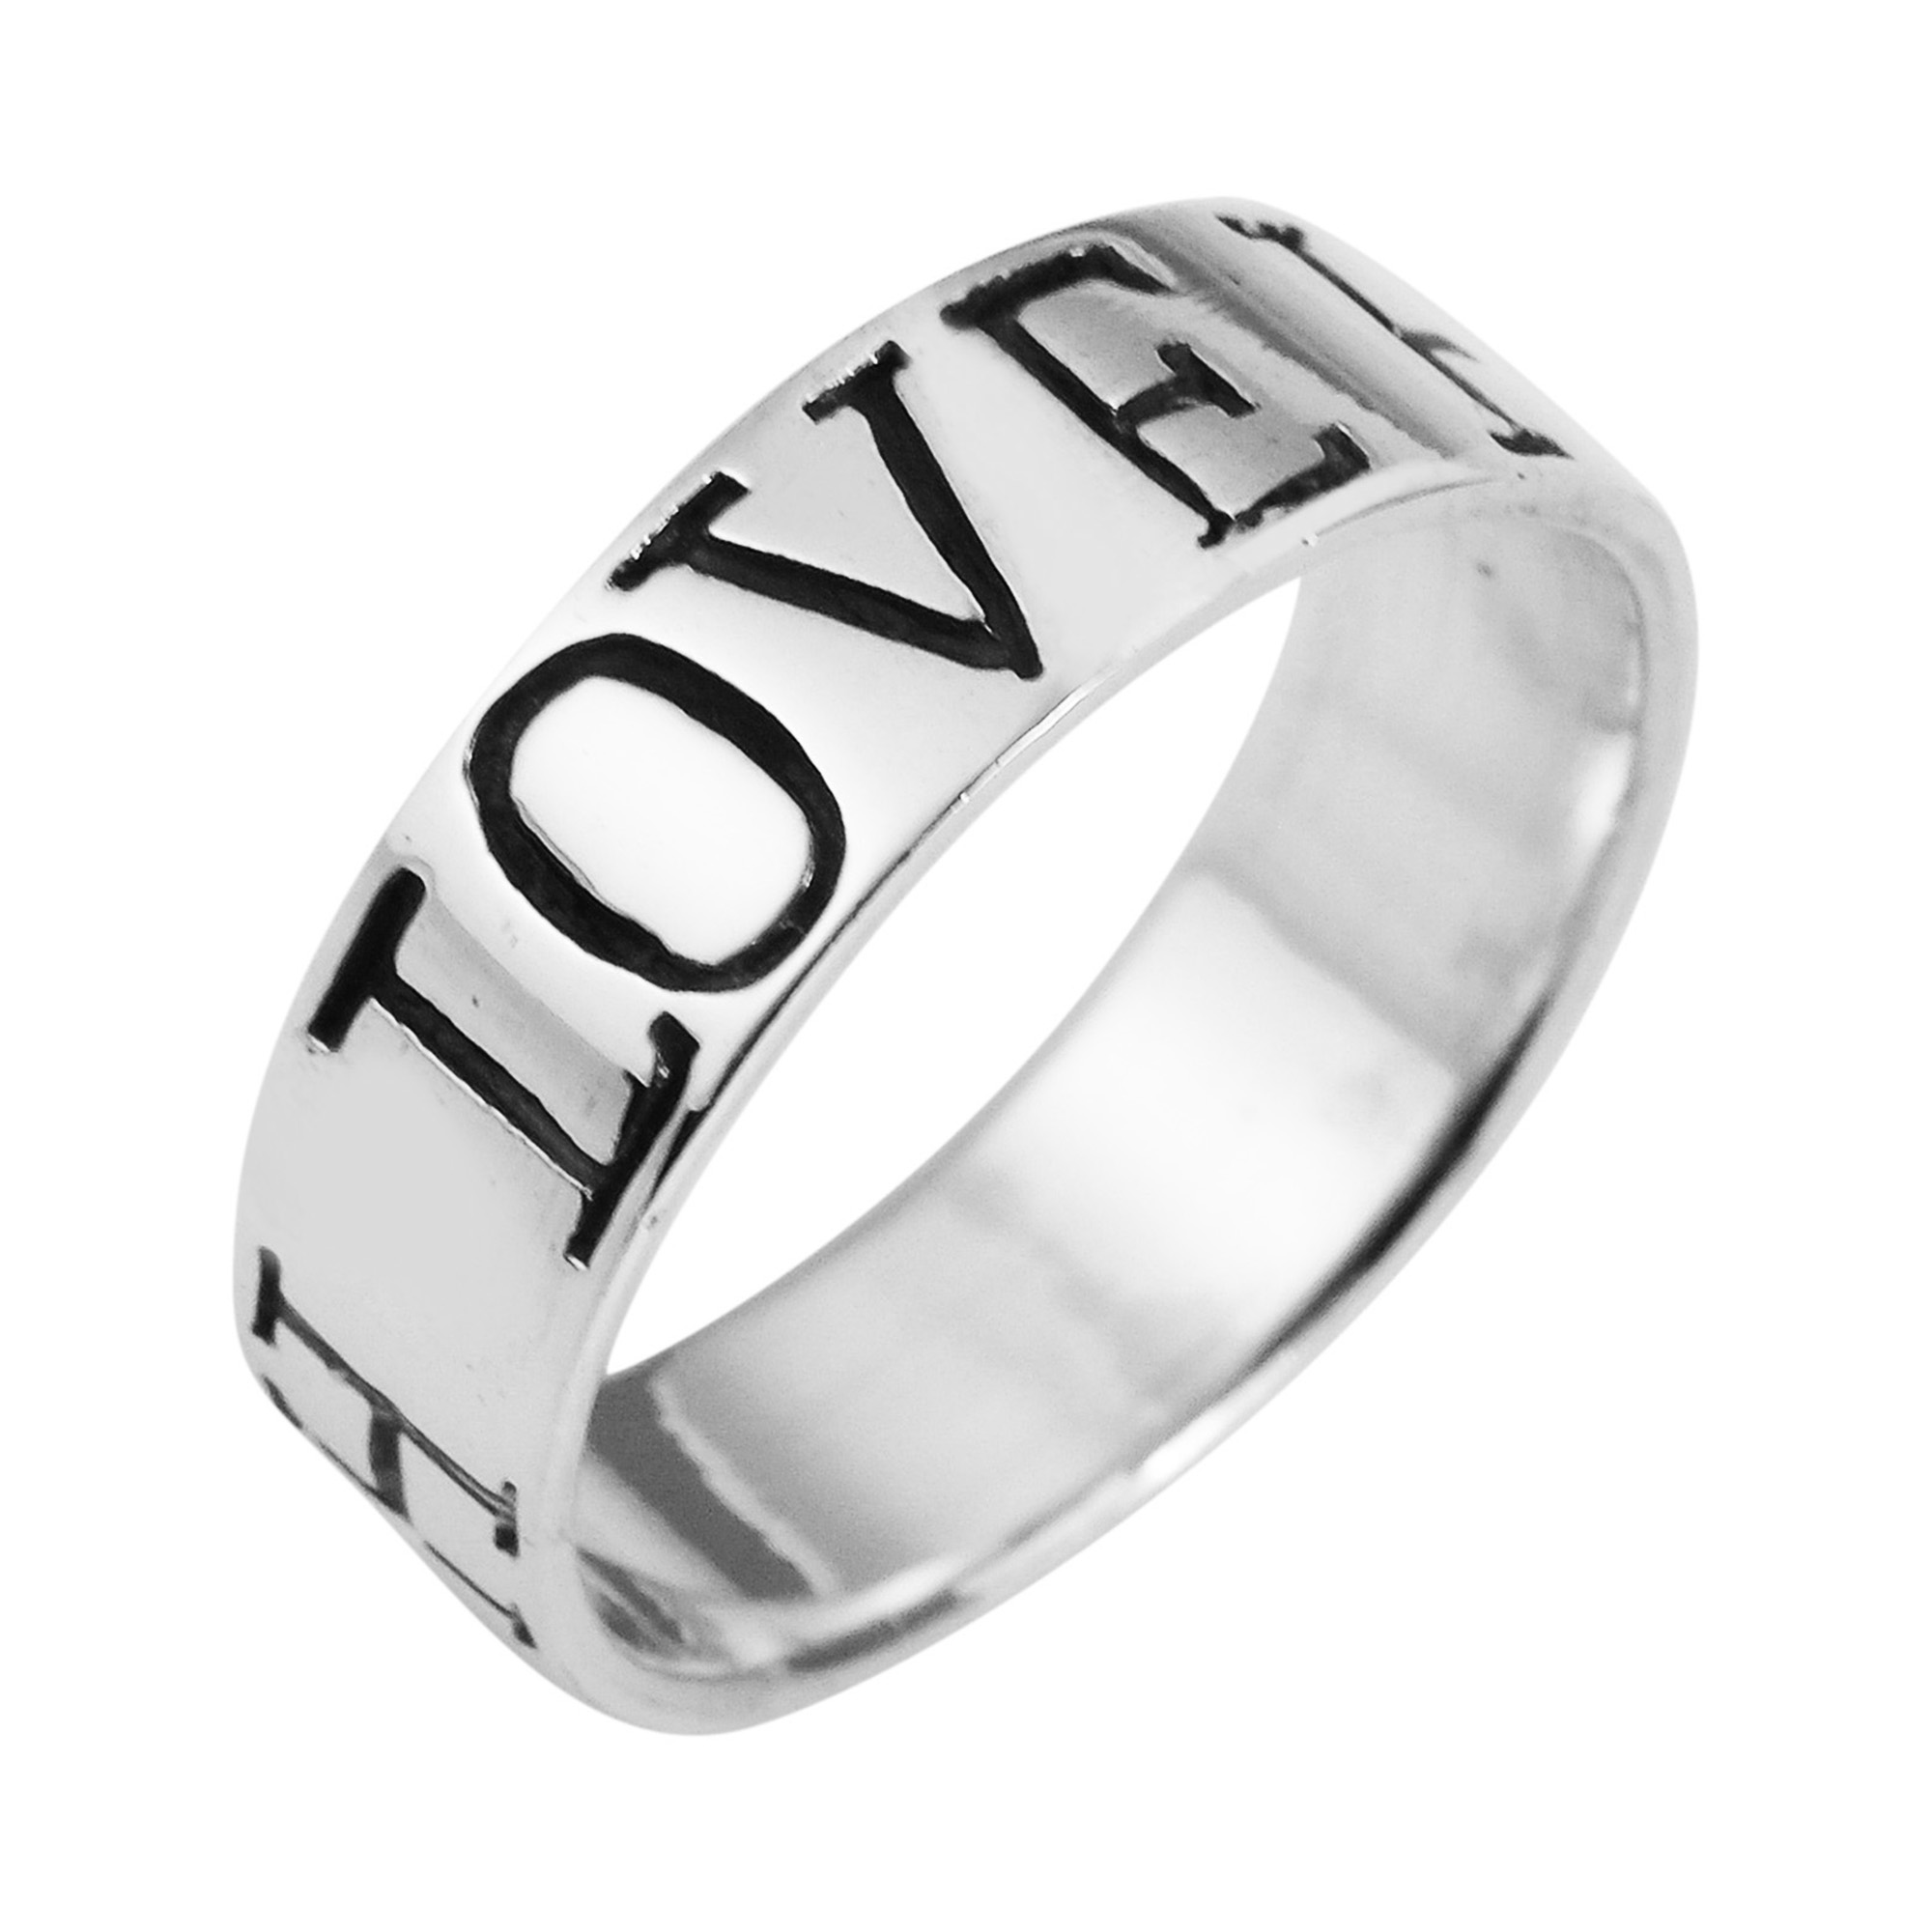 Inspirational “LOVE HOPE FAITH” Inscribed Sterling Silver Ring